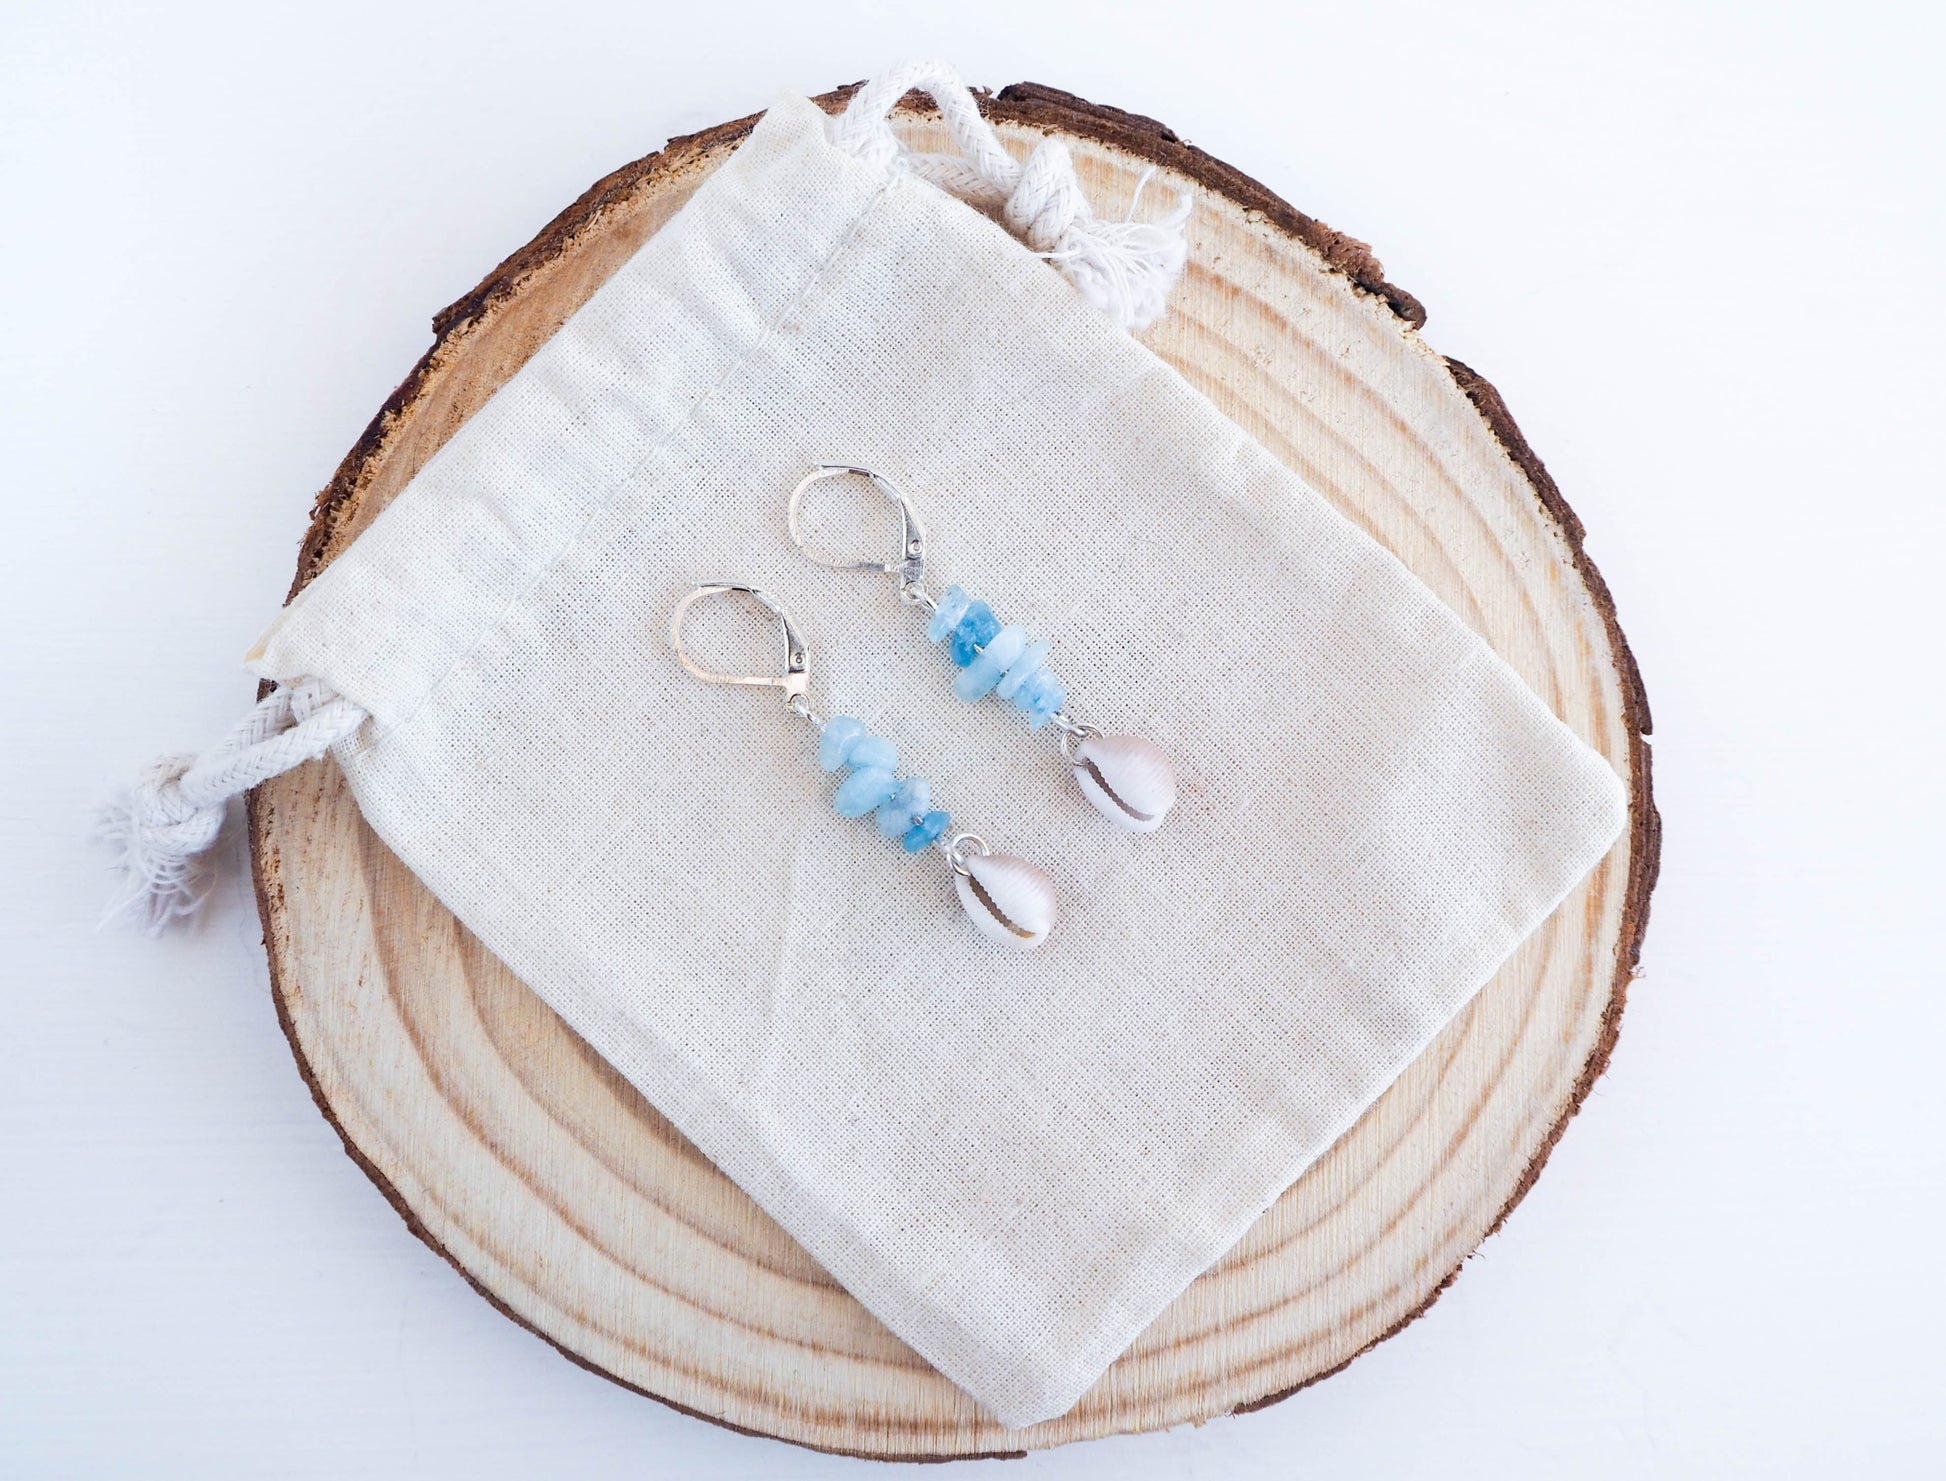 Elegant Cowrie Shell Earrings from Portugal with Shimmering Aquamarine Accents